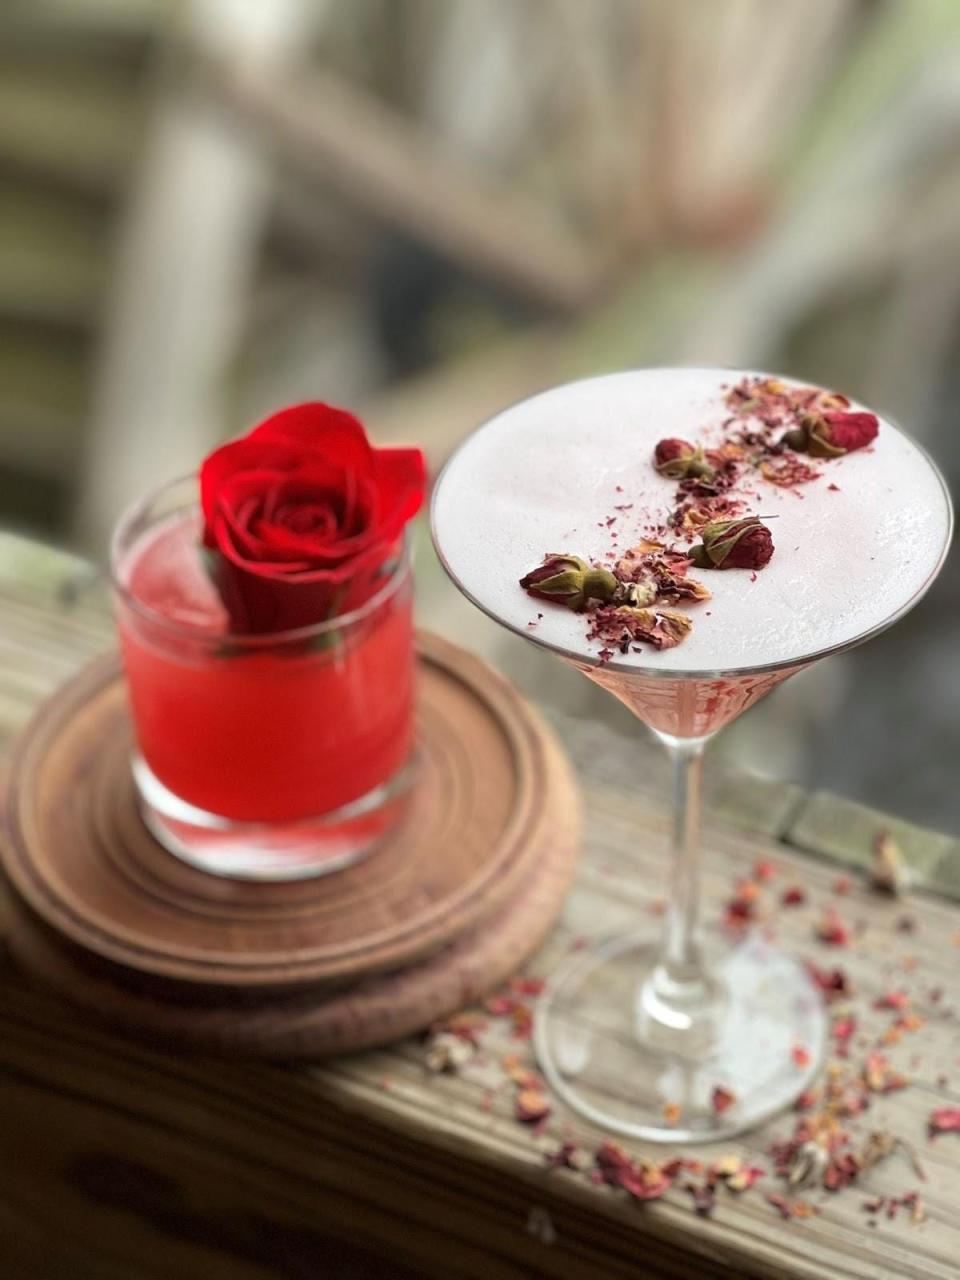 GlenPharmer Distillery is celebrating Valentine’s and Galentine’s Day with exclusive hand-crafted cocktails and specialty culinary offerings in Franklin, Massachusetts.